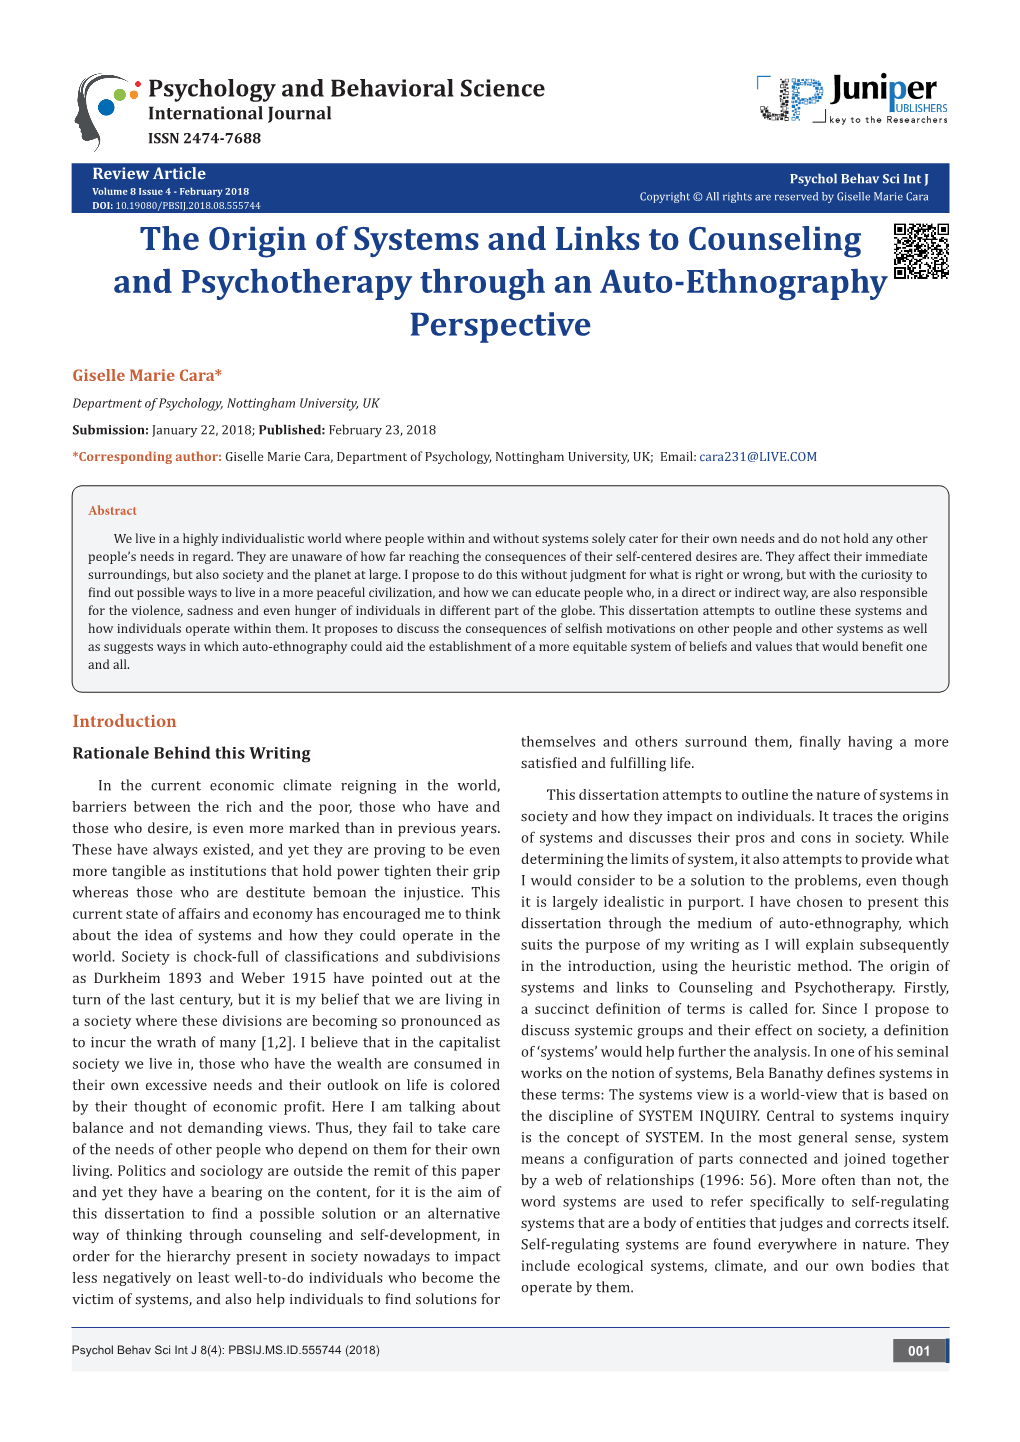 The Origin of Systems and Links to Counseling and Psychotherapy Through an Auto-Ethnography Perspective